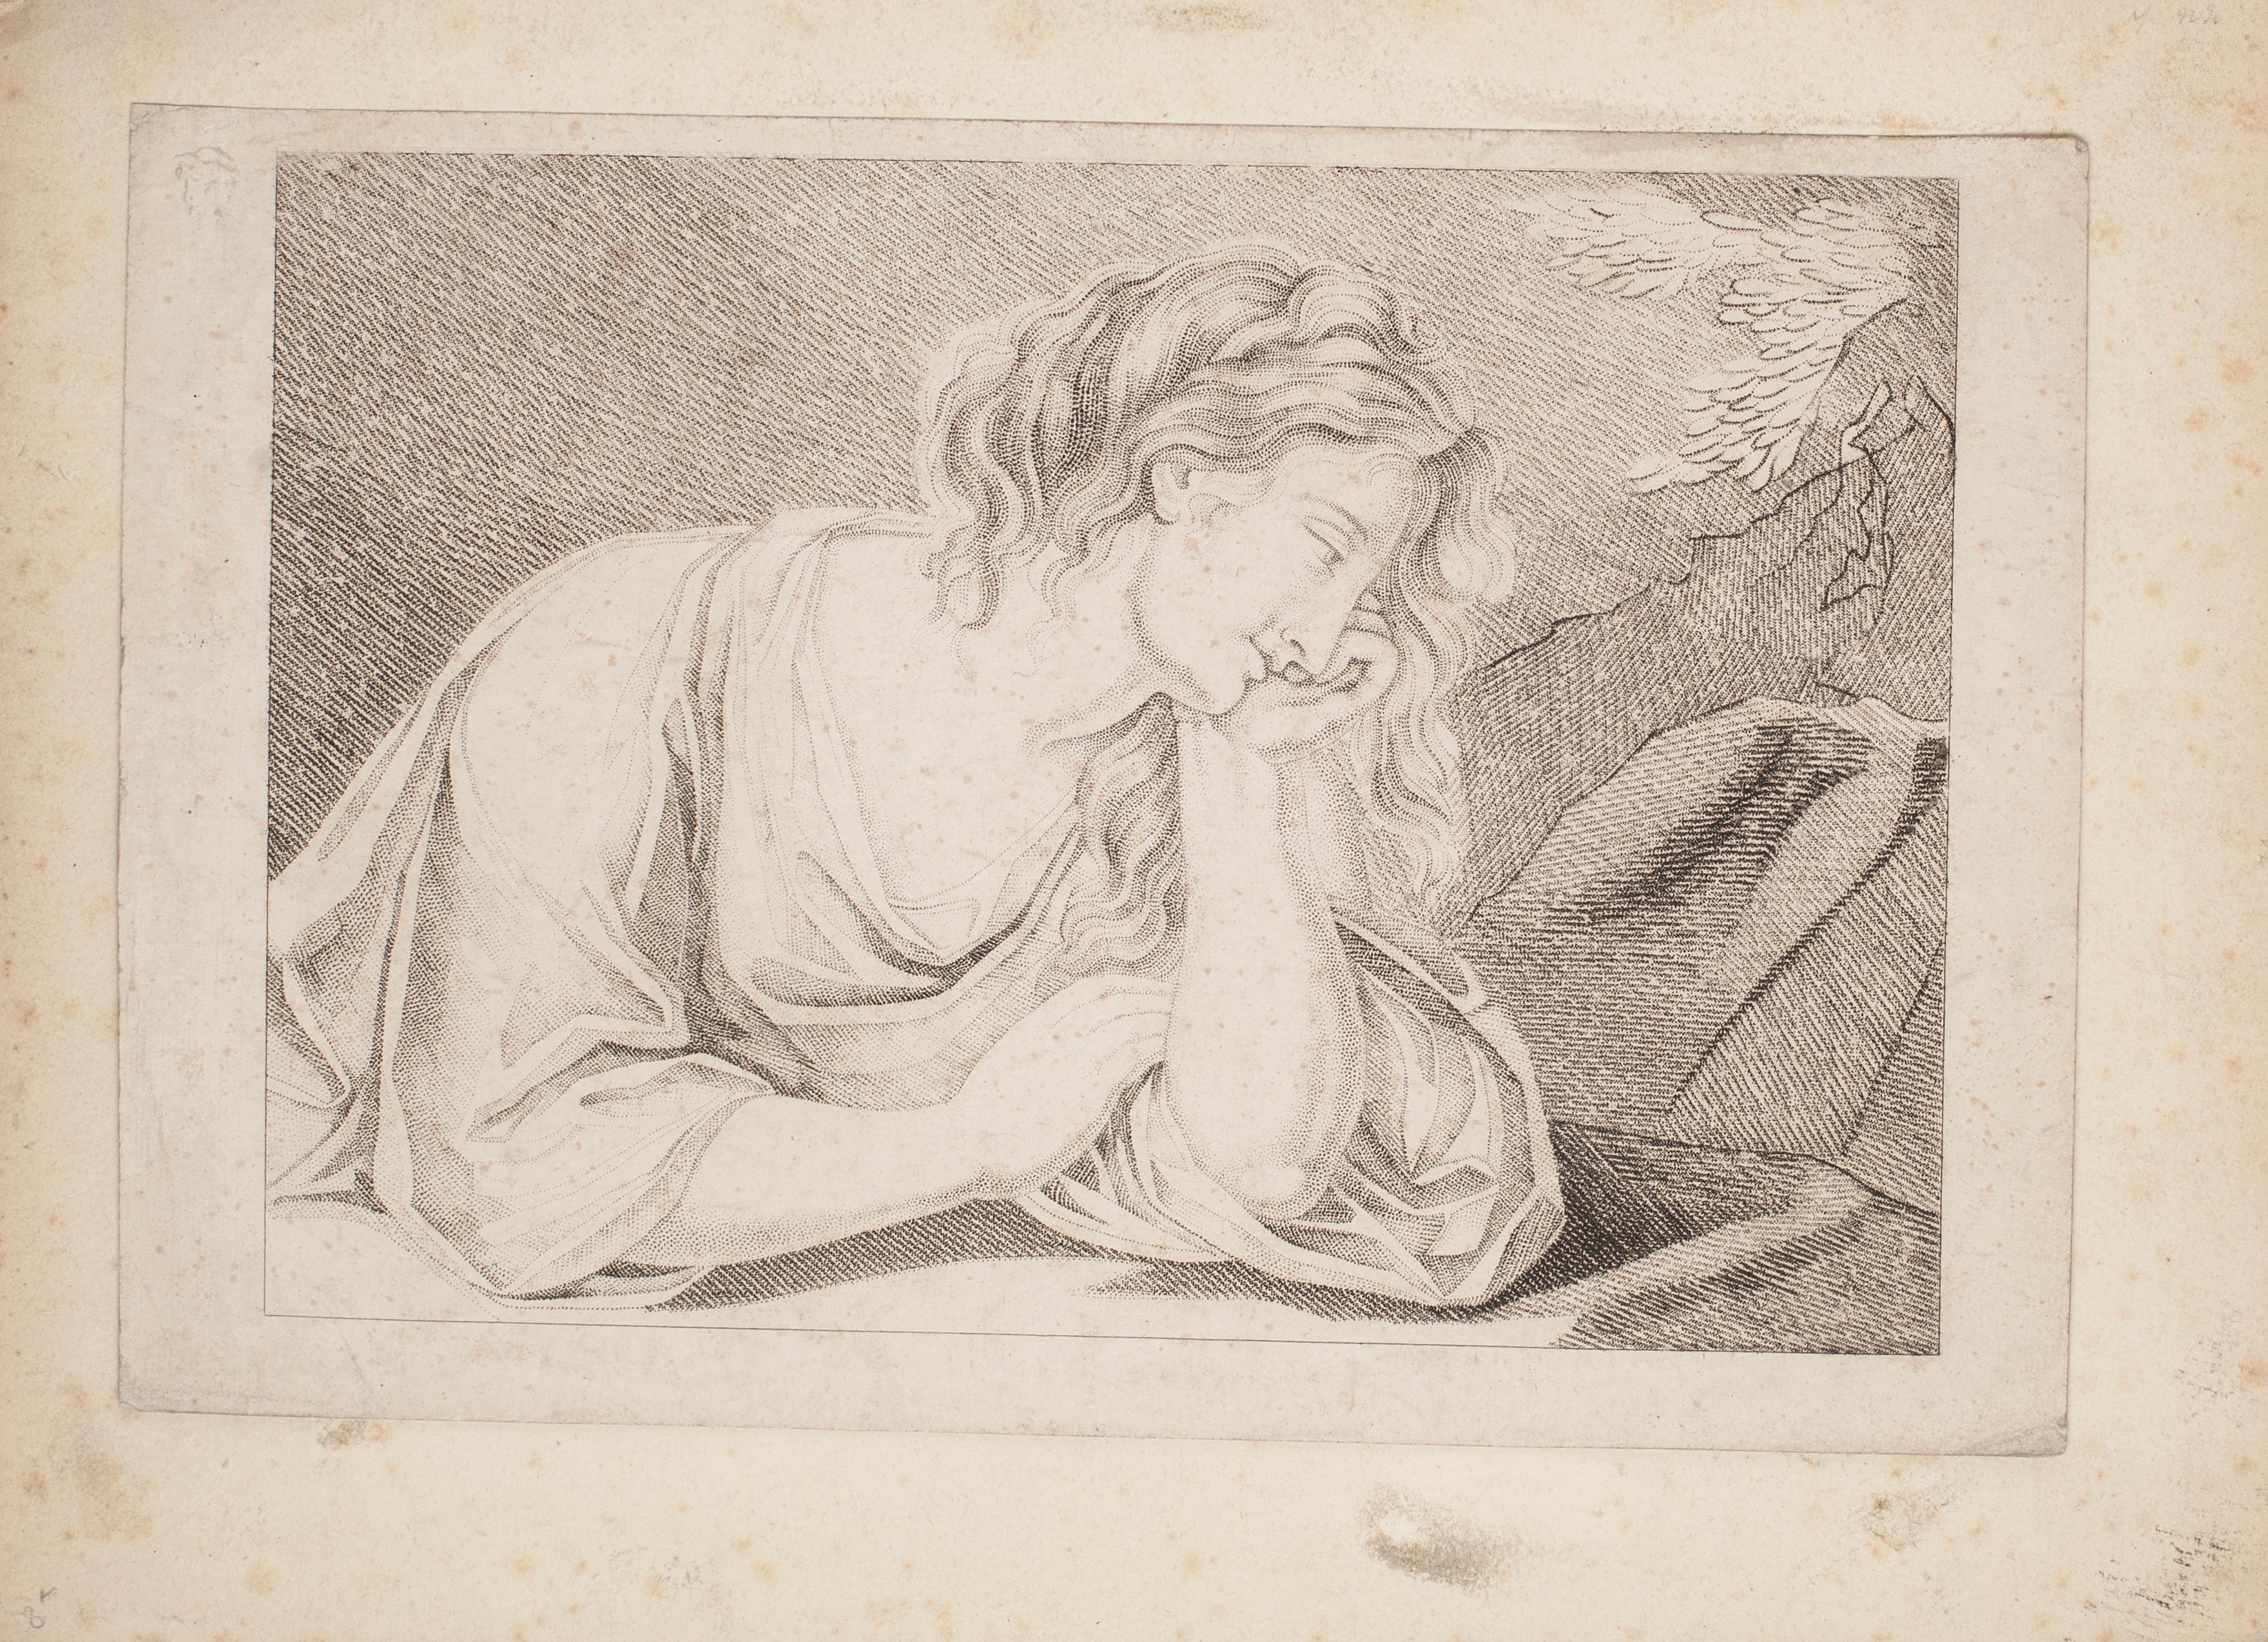 Unknown Figurative Print - Thinking Woman  - Etching - 19th Century